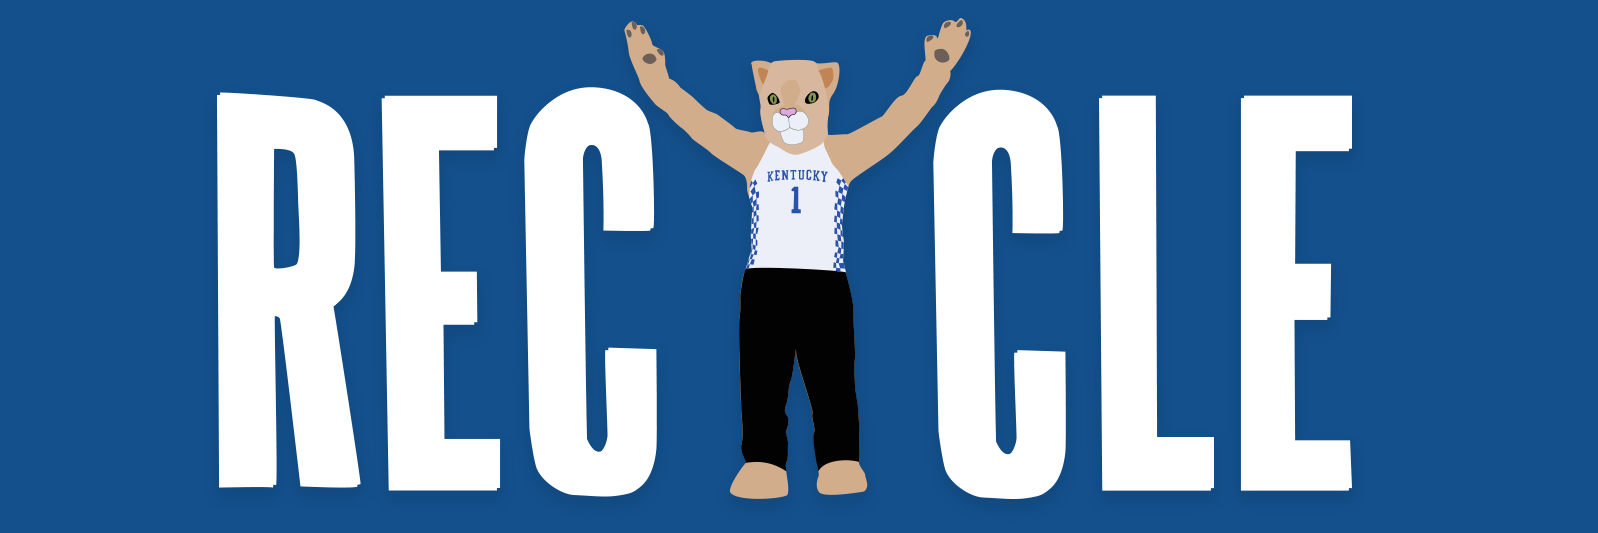 university of kentucky mascot holds his arms up to form a Y while standing in the middle of a word it reads recycle